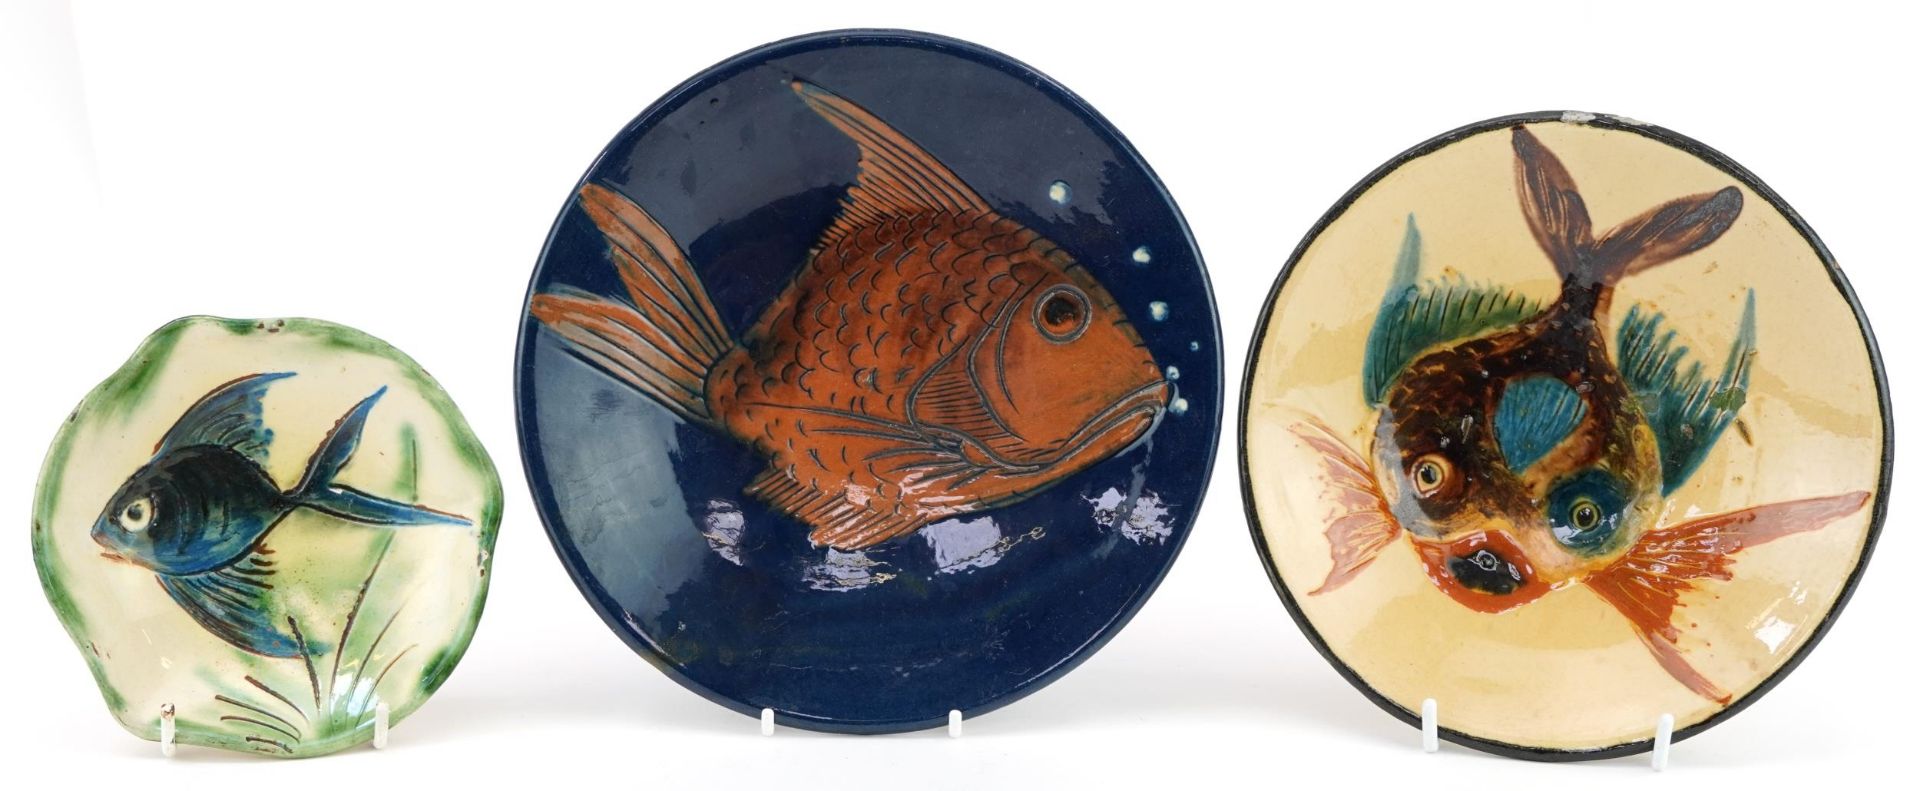 Three art pottery plates hand painted with stylised fish including one by Puigdemont, the largest